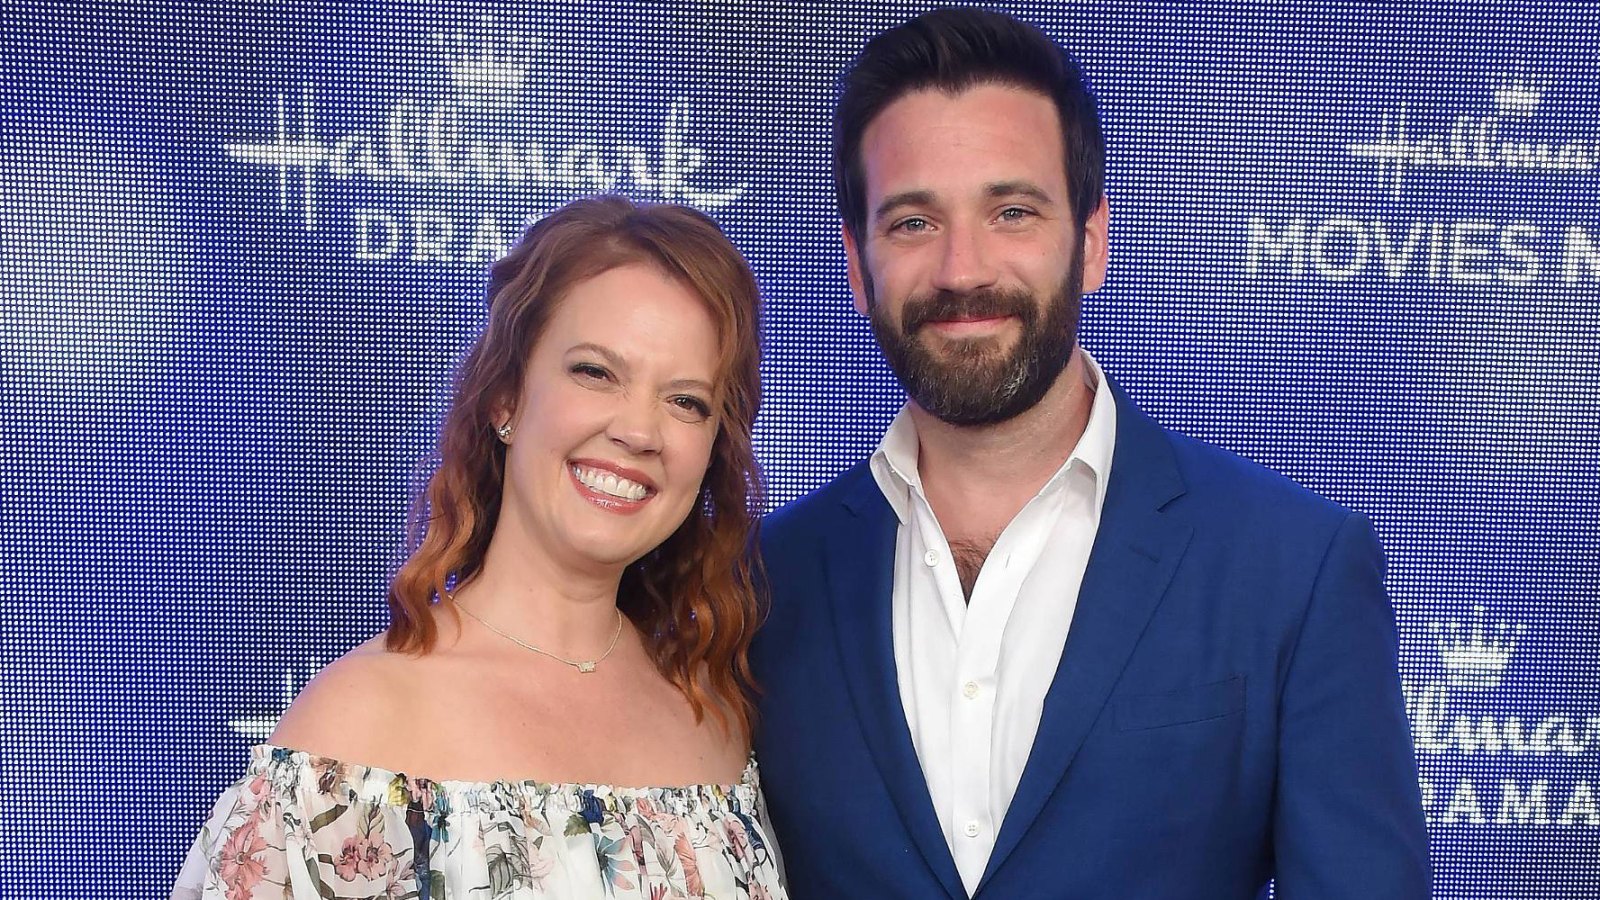 Chicago Med's Patti Murin and Colin Donnell Are Expecting Their 1st Child Together